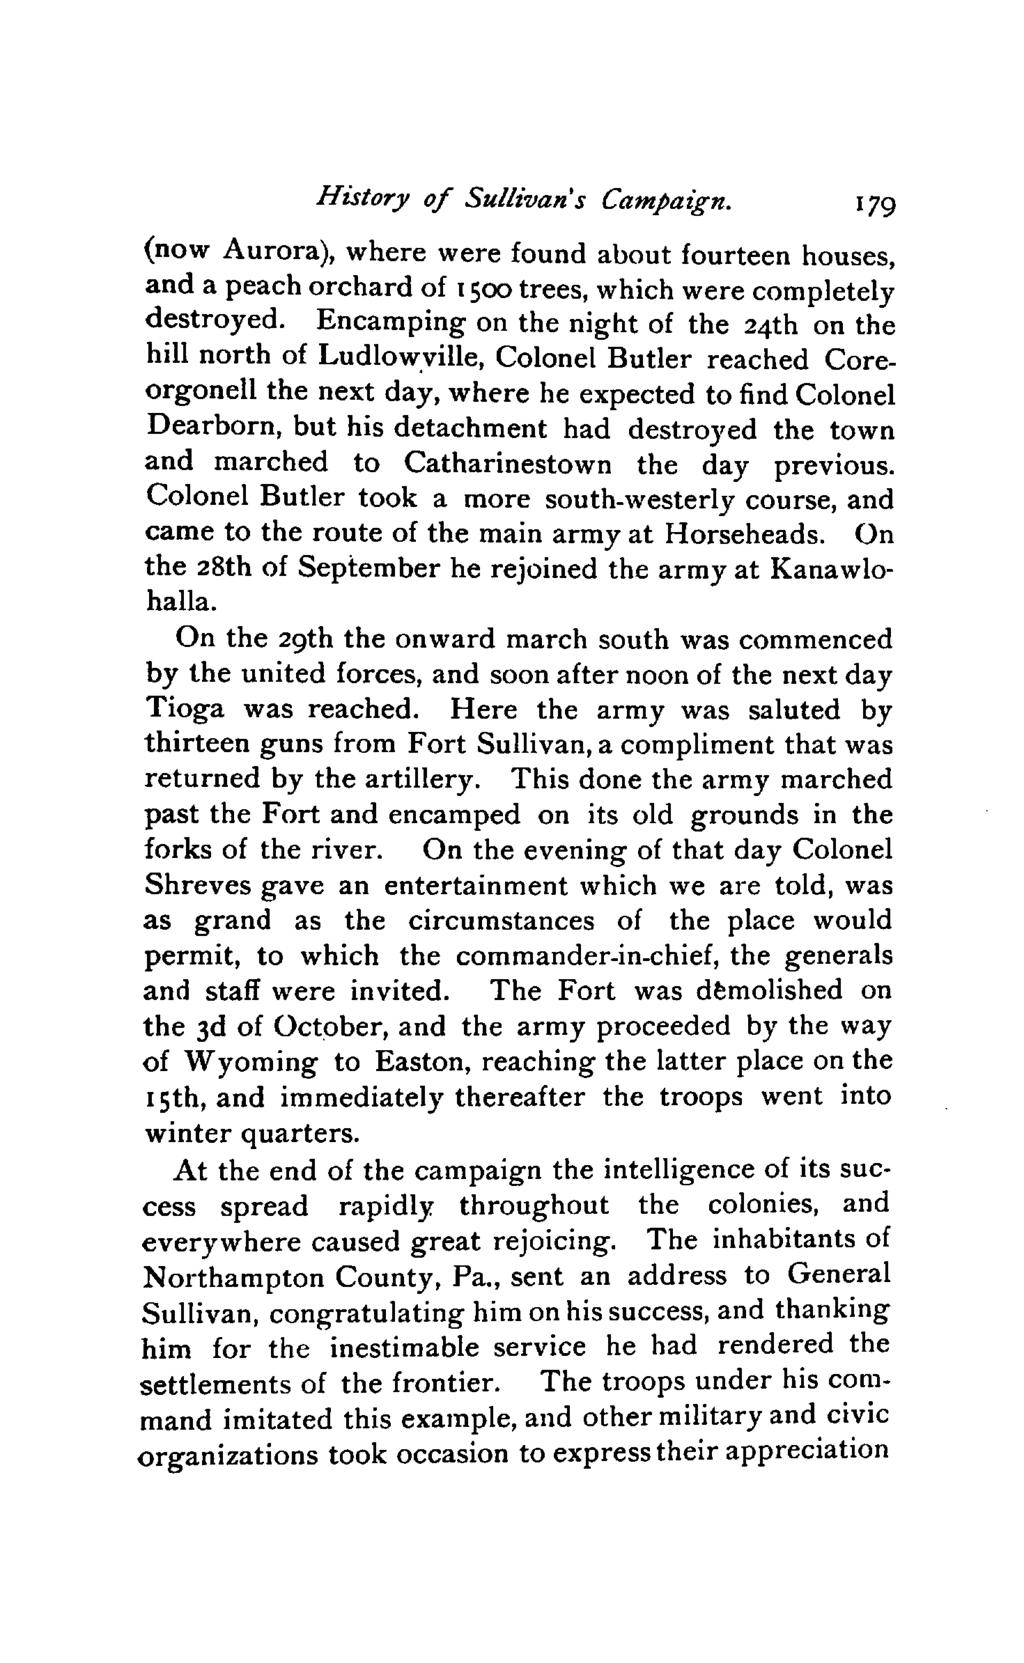 History of Sullivan s Campaign. 179 (now Aurora), where were found about fourteen houses, and a peach orchard of 1500 trees, which were completely destroyed.